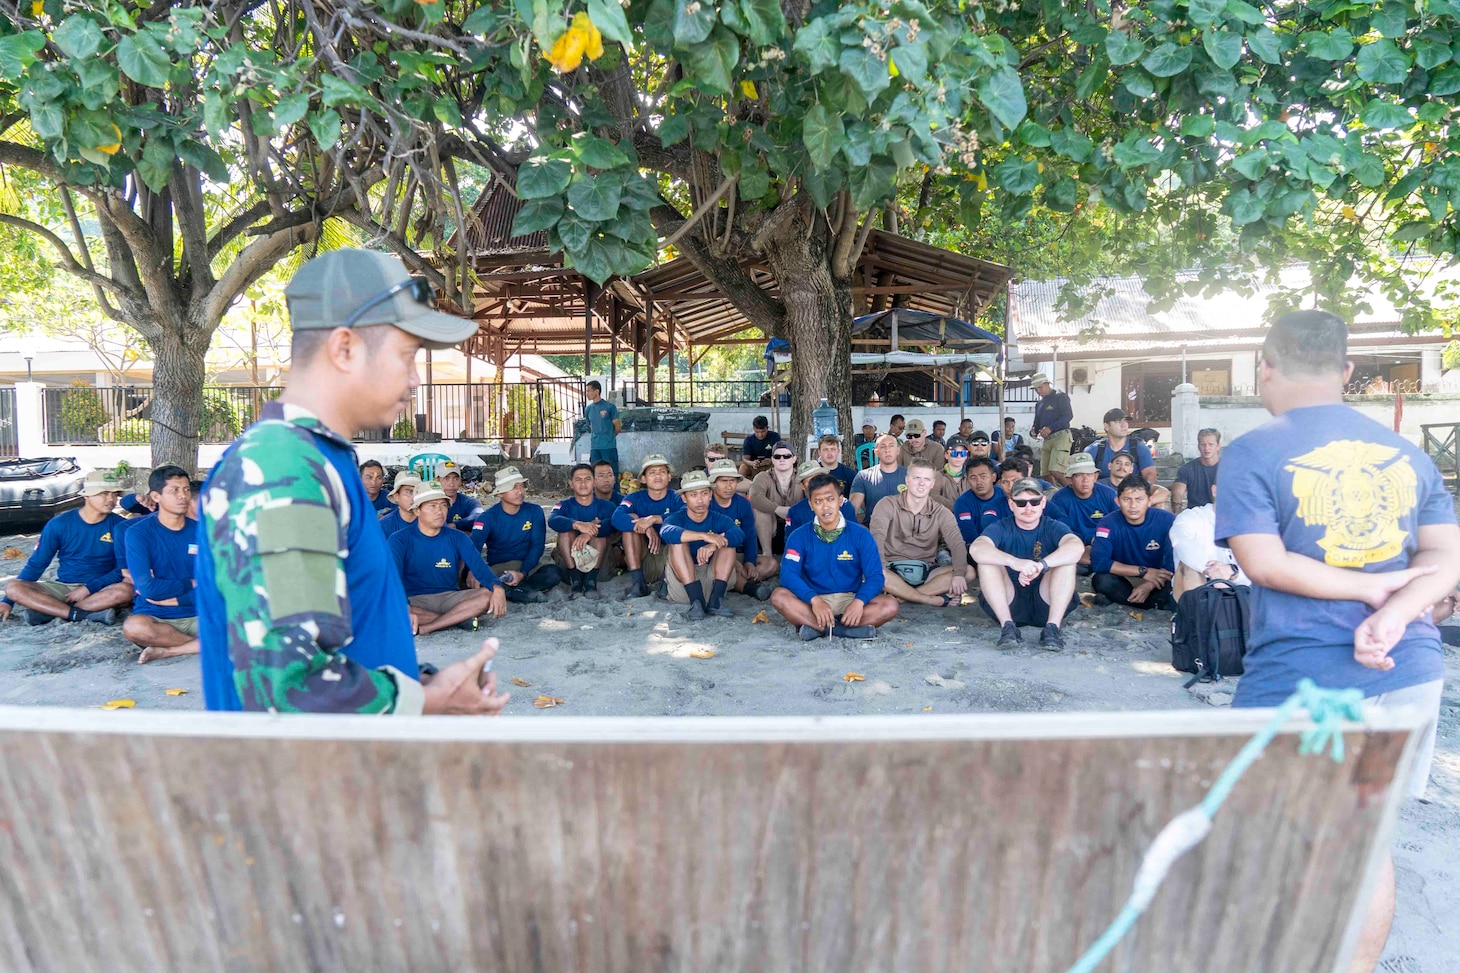 Indonesian Navy Sailors give a safety brief to Sailors assigned to Mobile Dive and Salvage Unit (MDSU) 1 in Situbondo as part of Cooperation Afloat Readiness and Training (CARAT)/Marine Exercise (MAREX) CARAT 2022, Dec. 12. CARAT/MAREX Indonesia is a bilateral exercise between Indonesia and the United States designed to promote regional security cooperation, maintain and strengthen maritime partnerships, and enhance maritime interoperability. In its 28th year, the CARAT series is comprised of multinational exercises, designed to enhance U.S. and partner forces’ abilities to operate together in response to traditional and non-traditional maritime security challenges in the Indo-Pacific region. Task Force 73 is responsible for conducting diving and salvage operations in the Western Pacific.